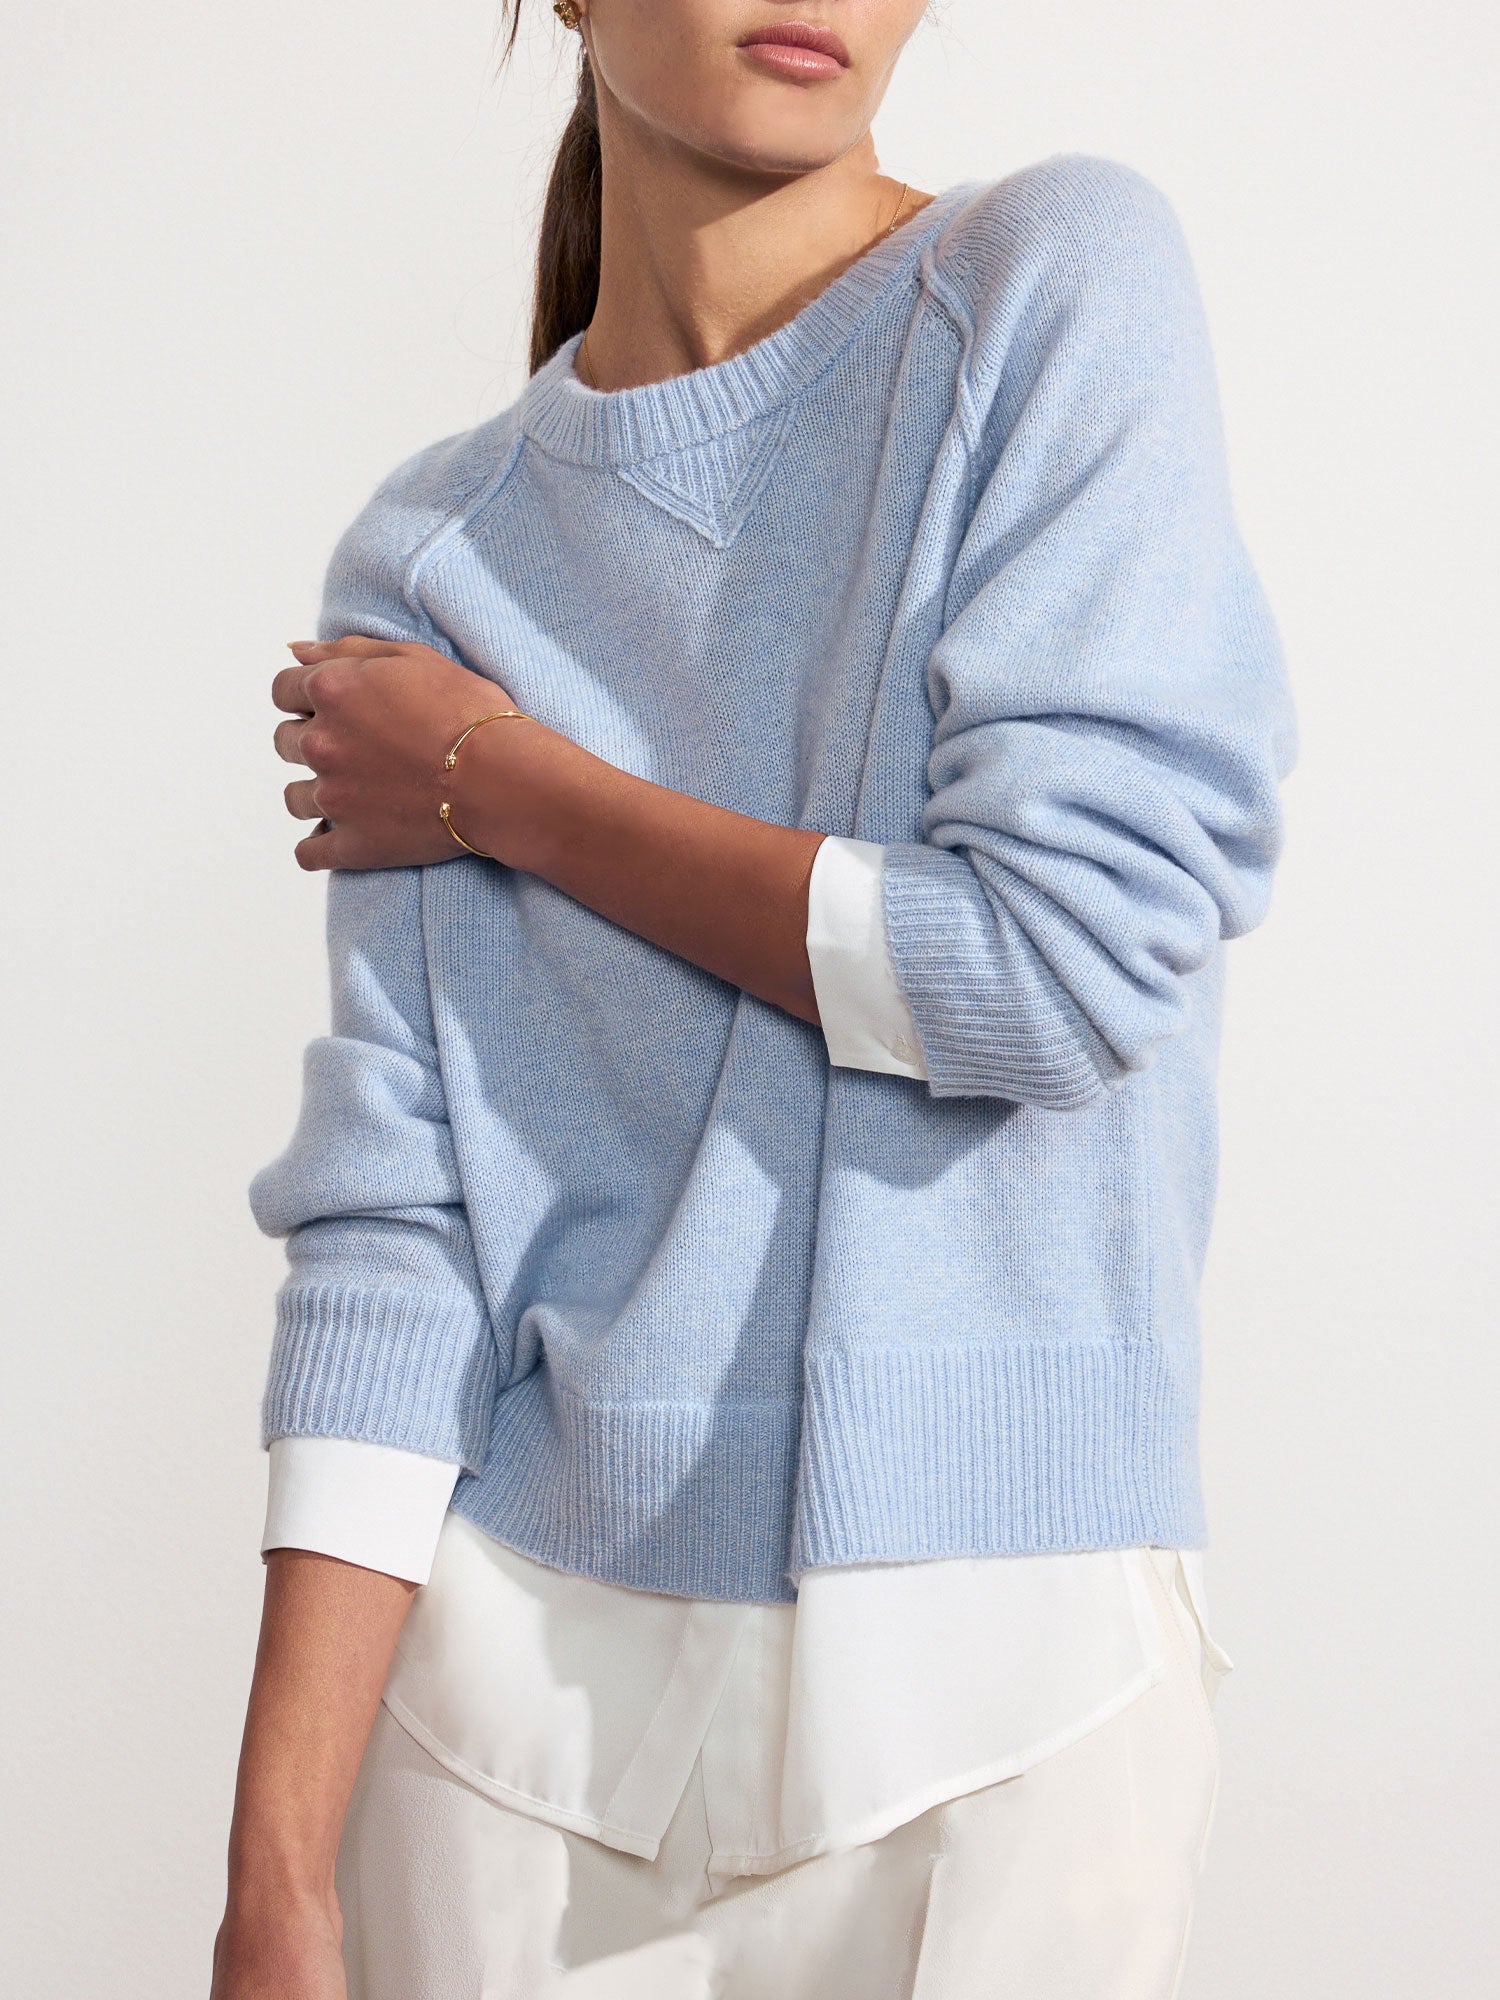 Looker Layered crewneck light blue sweater front view